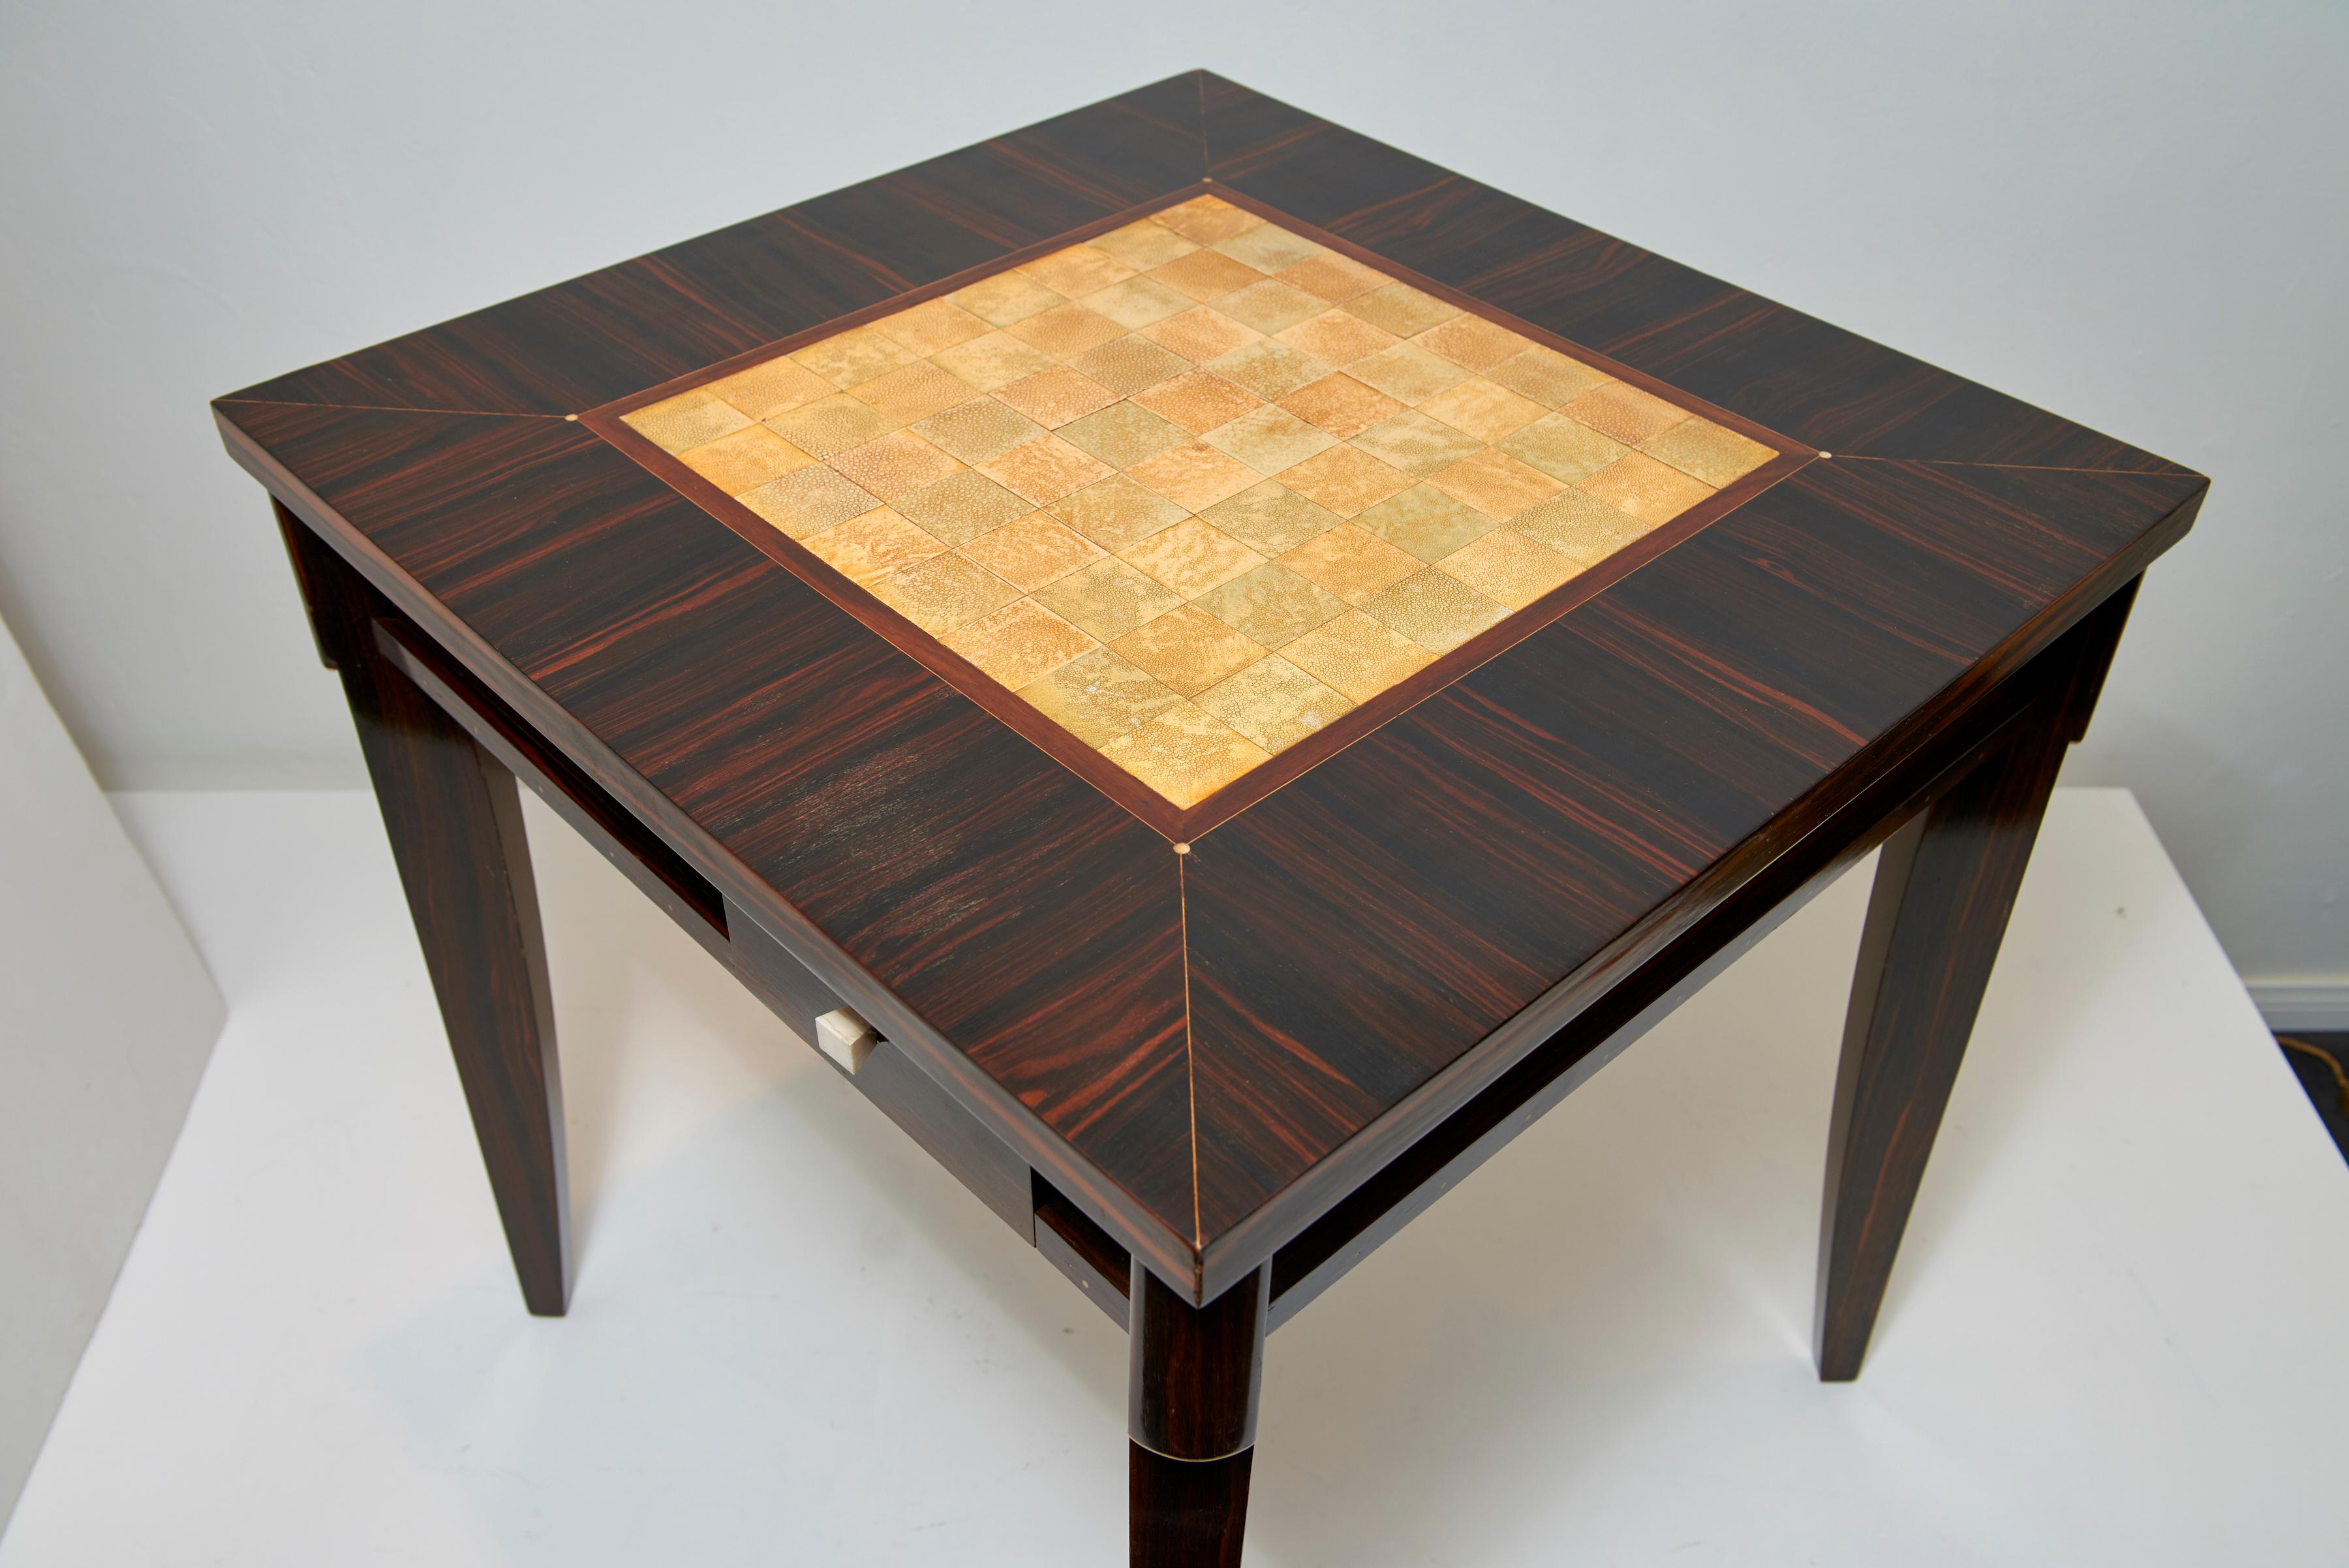 20th Century Clement Rousseau Macassar Games Table with Shagreen Top For Sale